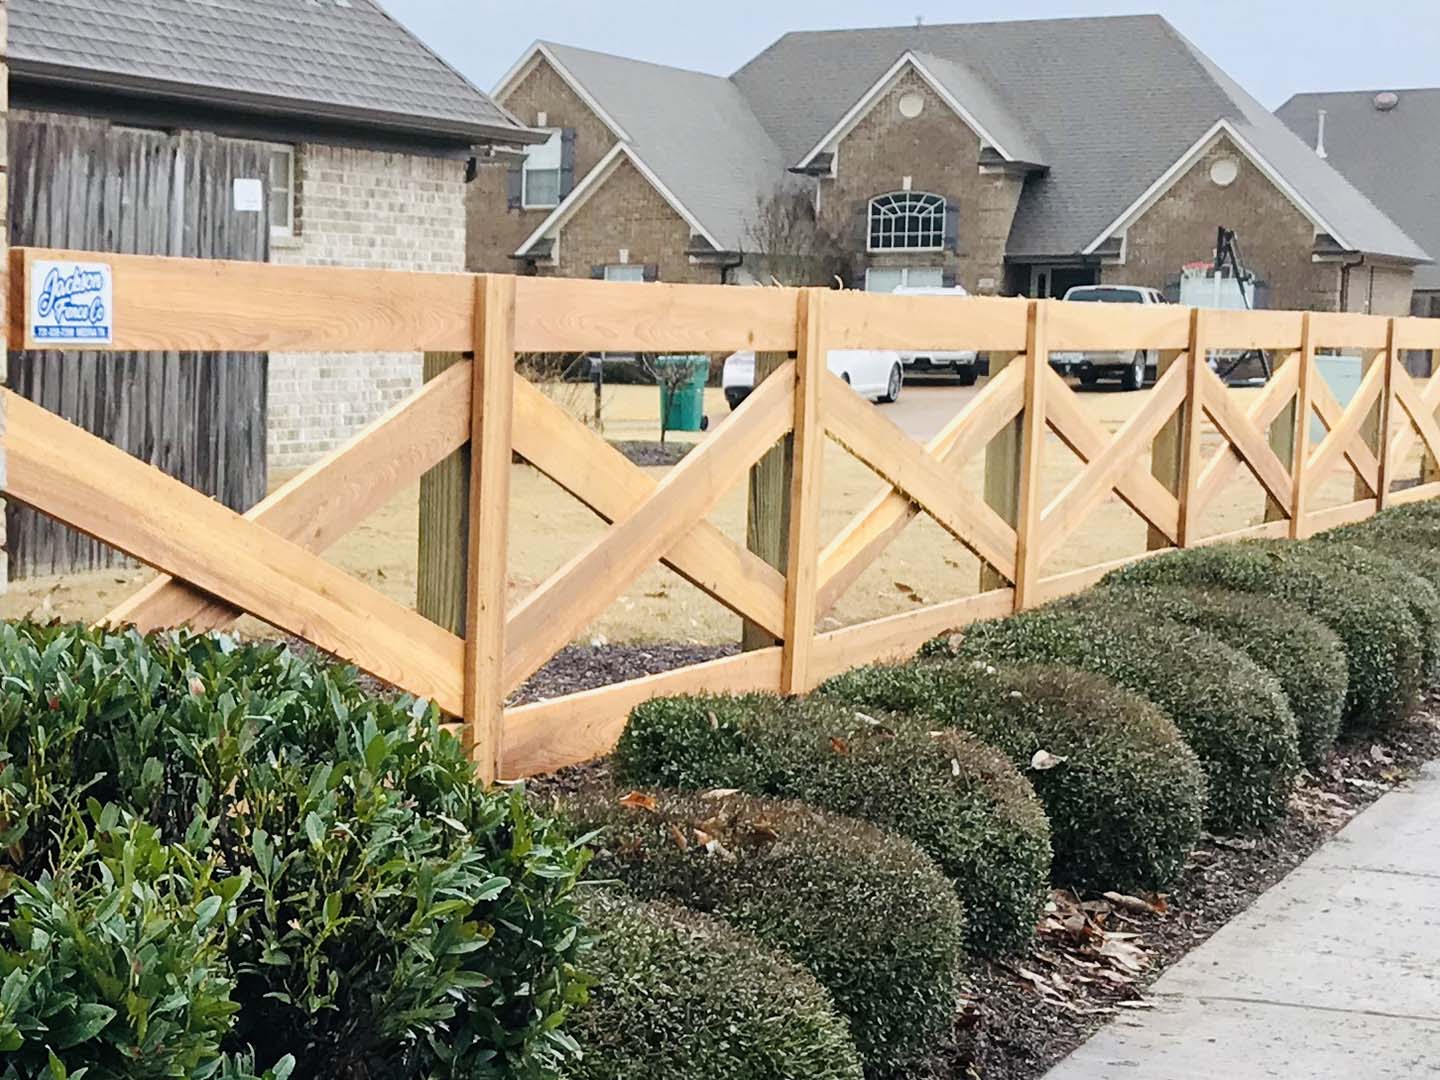  Trenton Tennessee Fence Project Photo